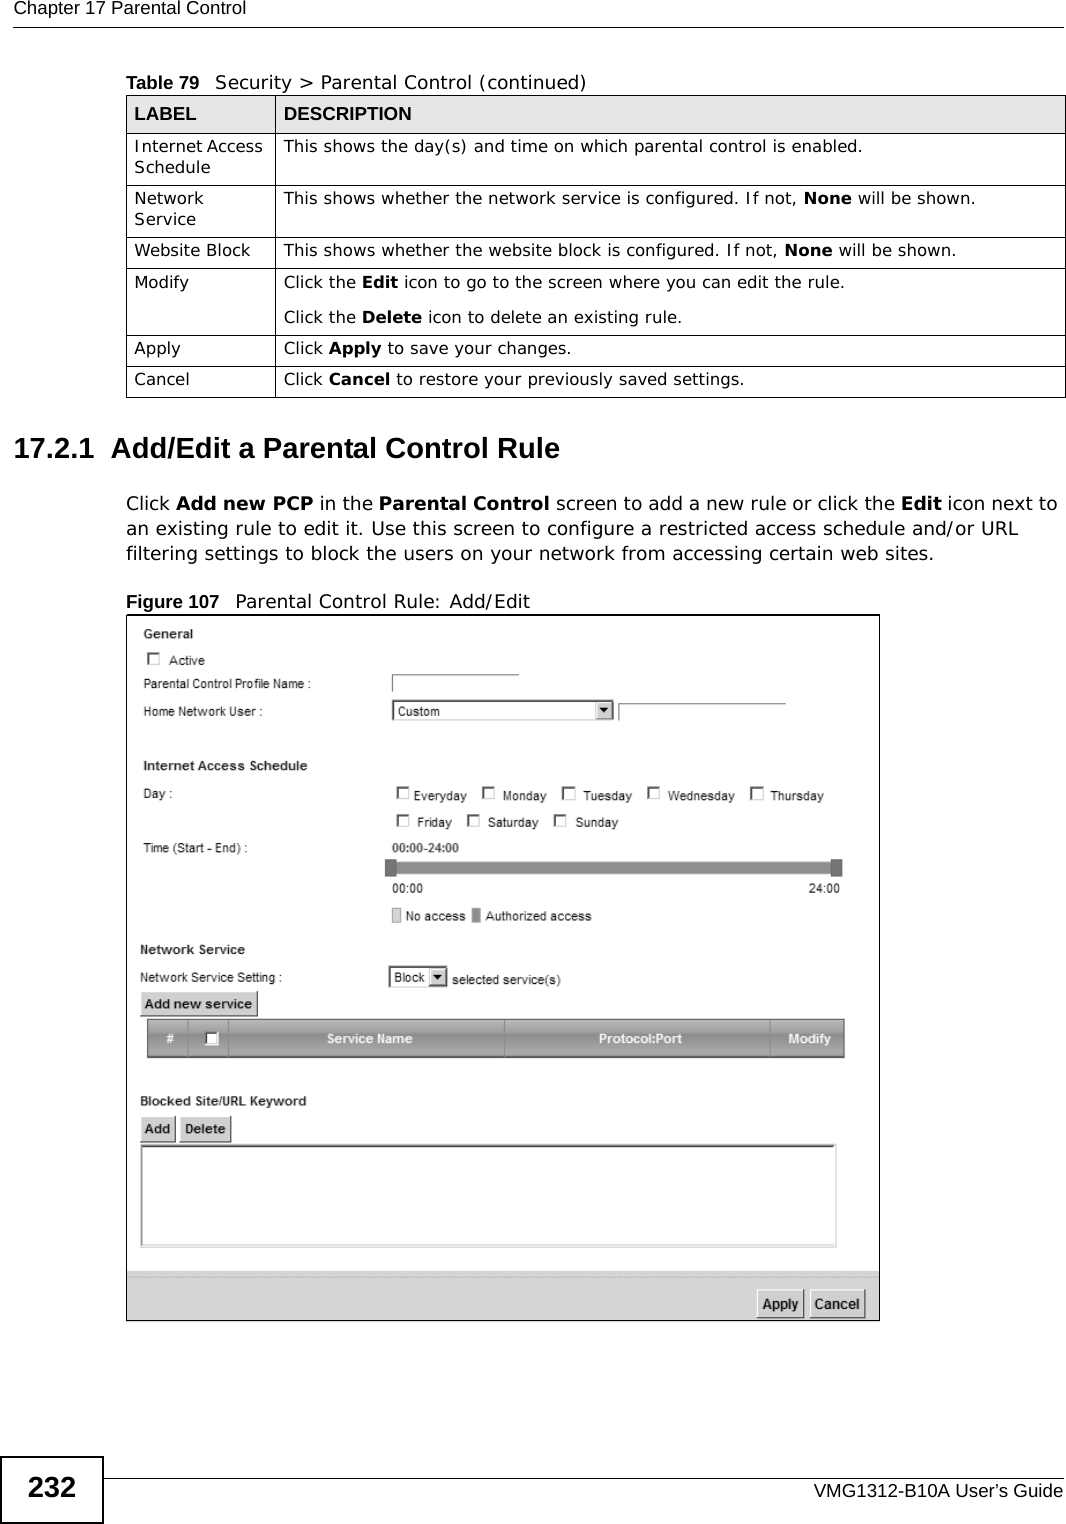 Chapter 17 Parental ControlVMG1312-B10A User’s Guide23217.2.1  Add/Edit a Parental Control RuleClick Add new PCP in the Parental Control screen to add a new rule or click the Edit icon next to an existing rule to edit it. Use this screen to configure a restricted access schedule and/or URL filtering settings to block the users on your network from accessing certain web sites.Figure 107   Parental Control Rule: Add/Edit Internet Access Schedule This shows the day(s) and time on which parental control is enabled.Network Service This shows whether the network service is configured. If not, None will be shown.Website Block This shows whether the website block is configured. If not, None will be shown.Modify Click the Edit icon to go to the screen where you can edit the rule.Click the Delete icon to delete an existing rule.Apply Click Apply to save your changes.Cancel Click Cancel to restore your previously saved settings.Table 79   Security &gt; Parental Control (continued)LABEL DESCRIPTION